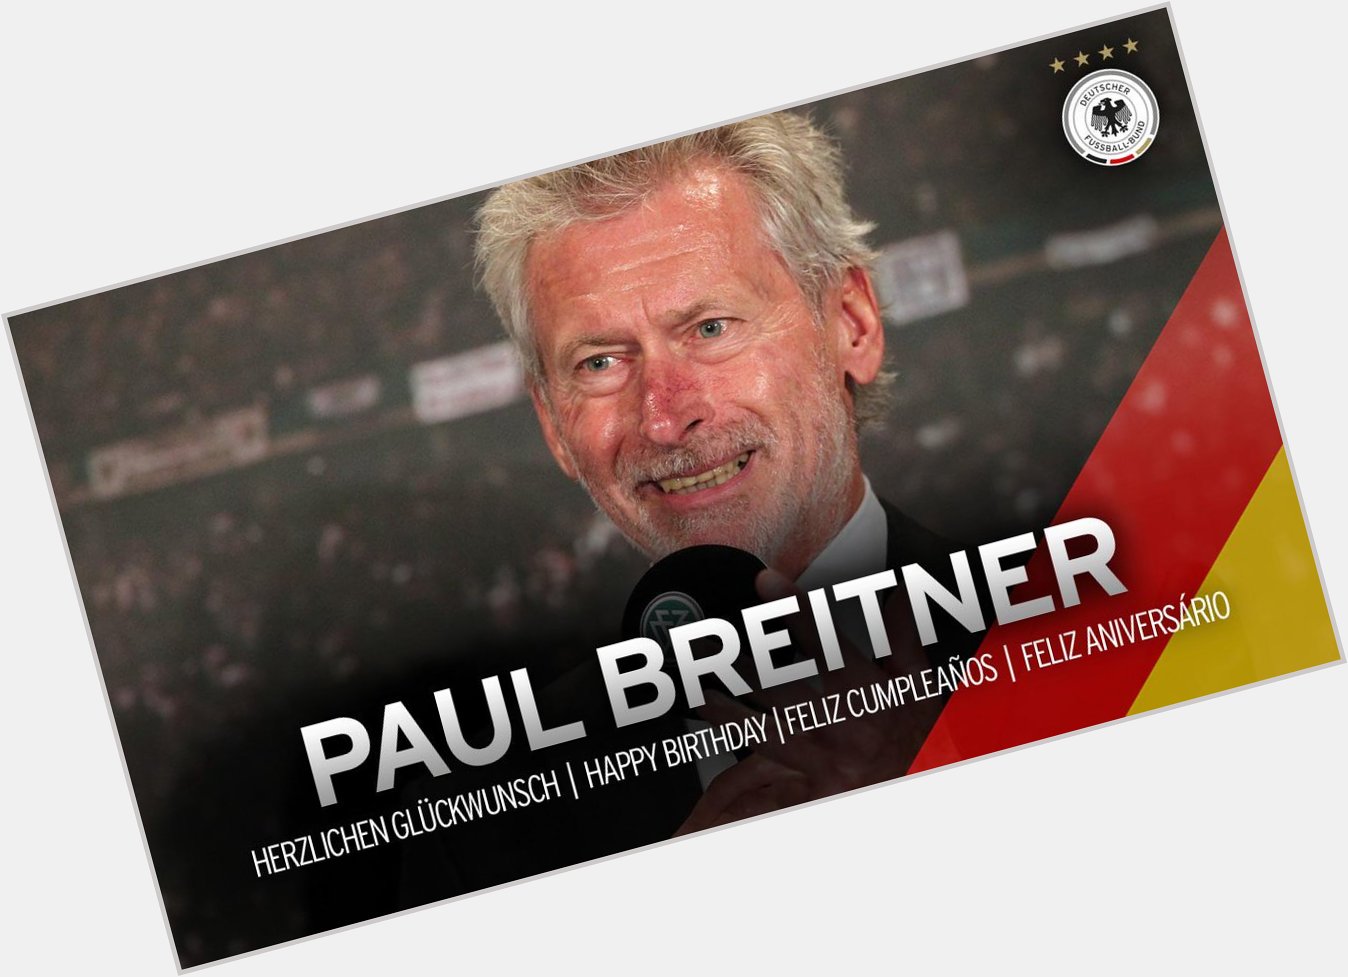 A World Cup and European Championship winner turns 64 today -  happy birthday Paul Breitner! 